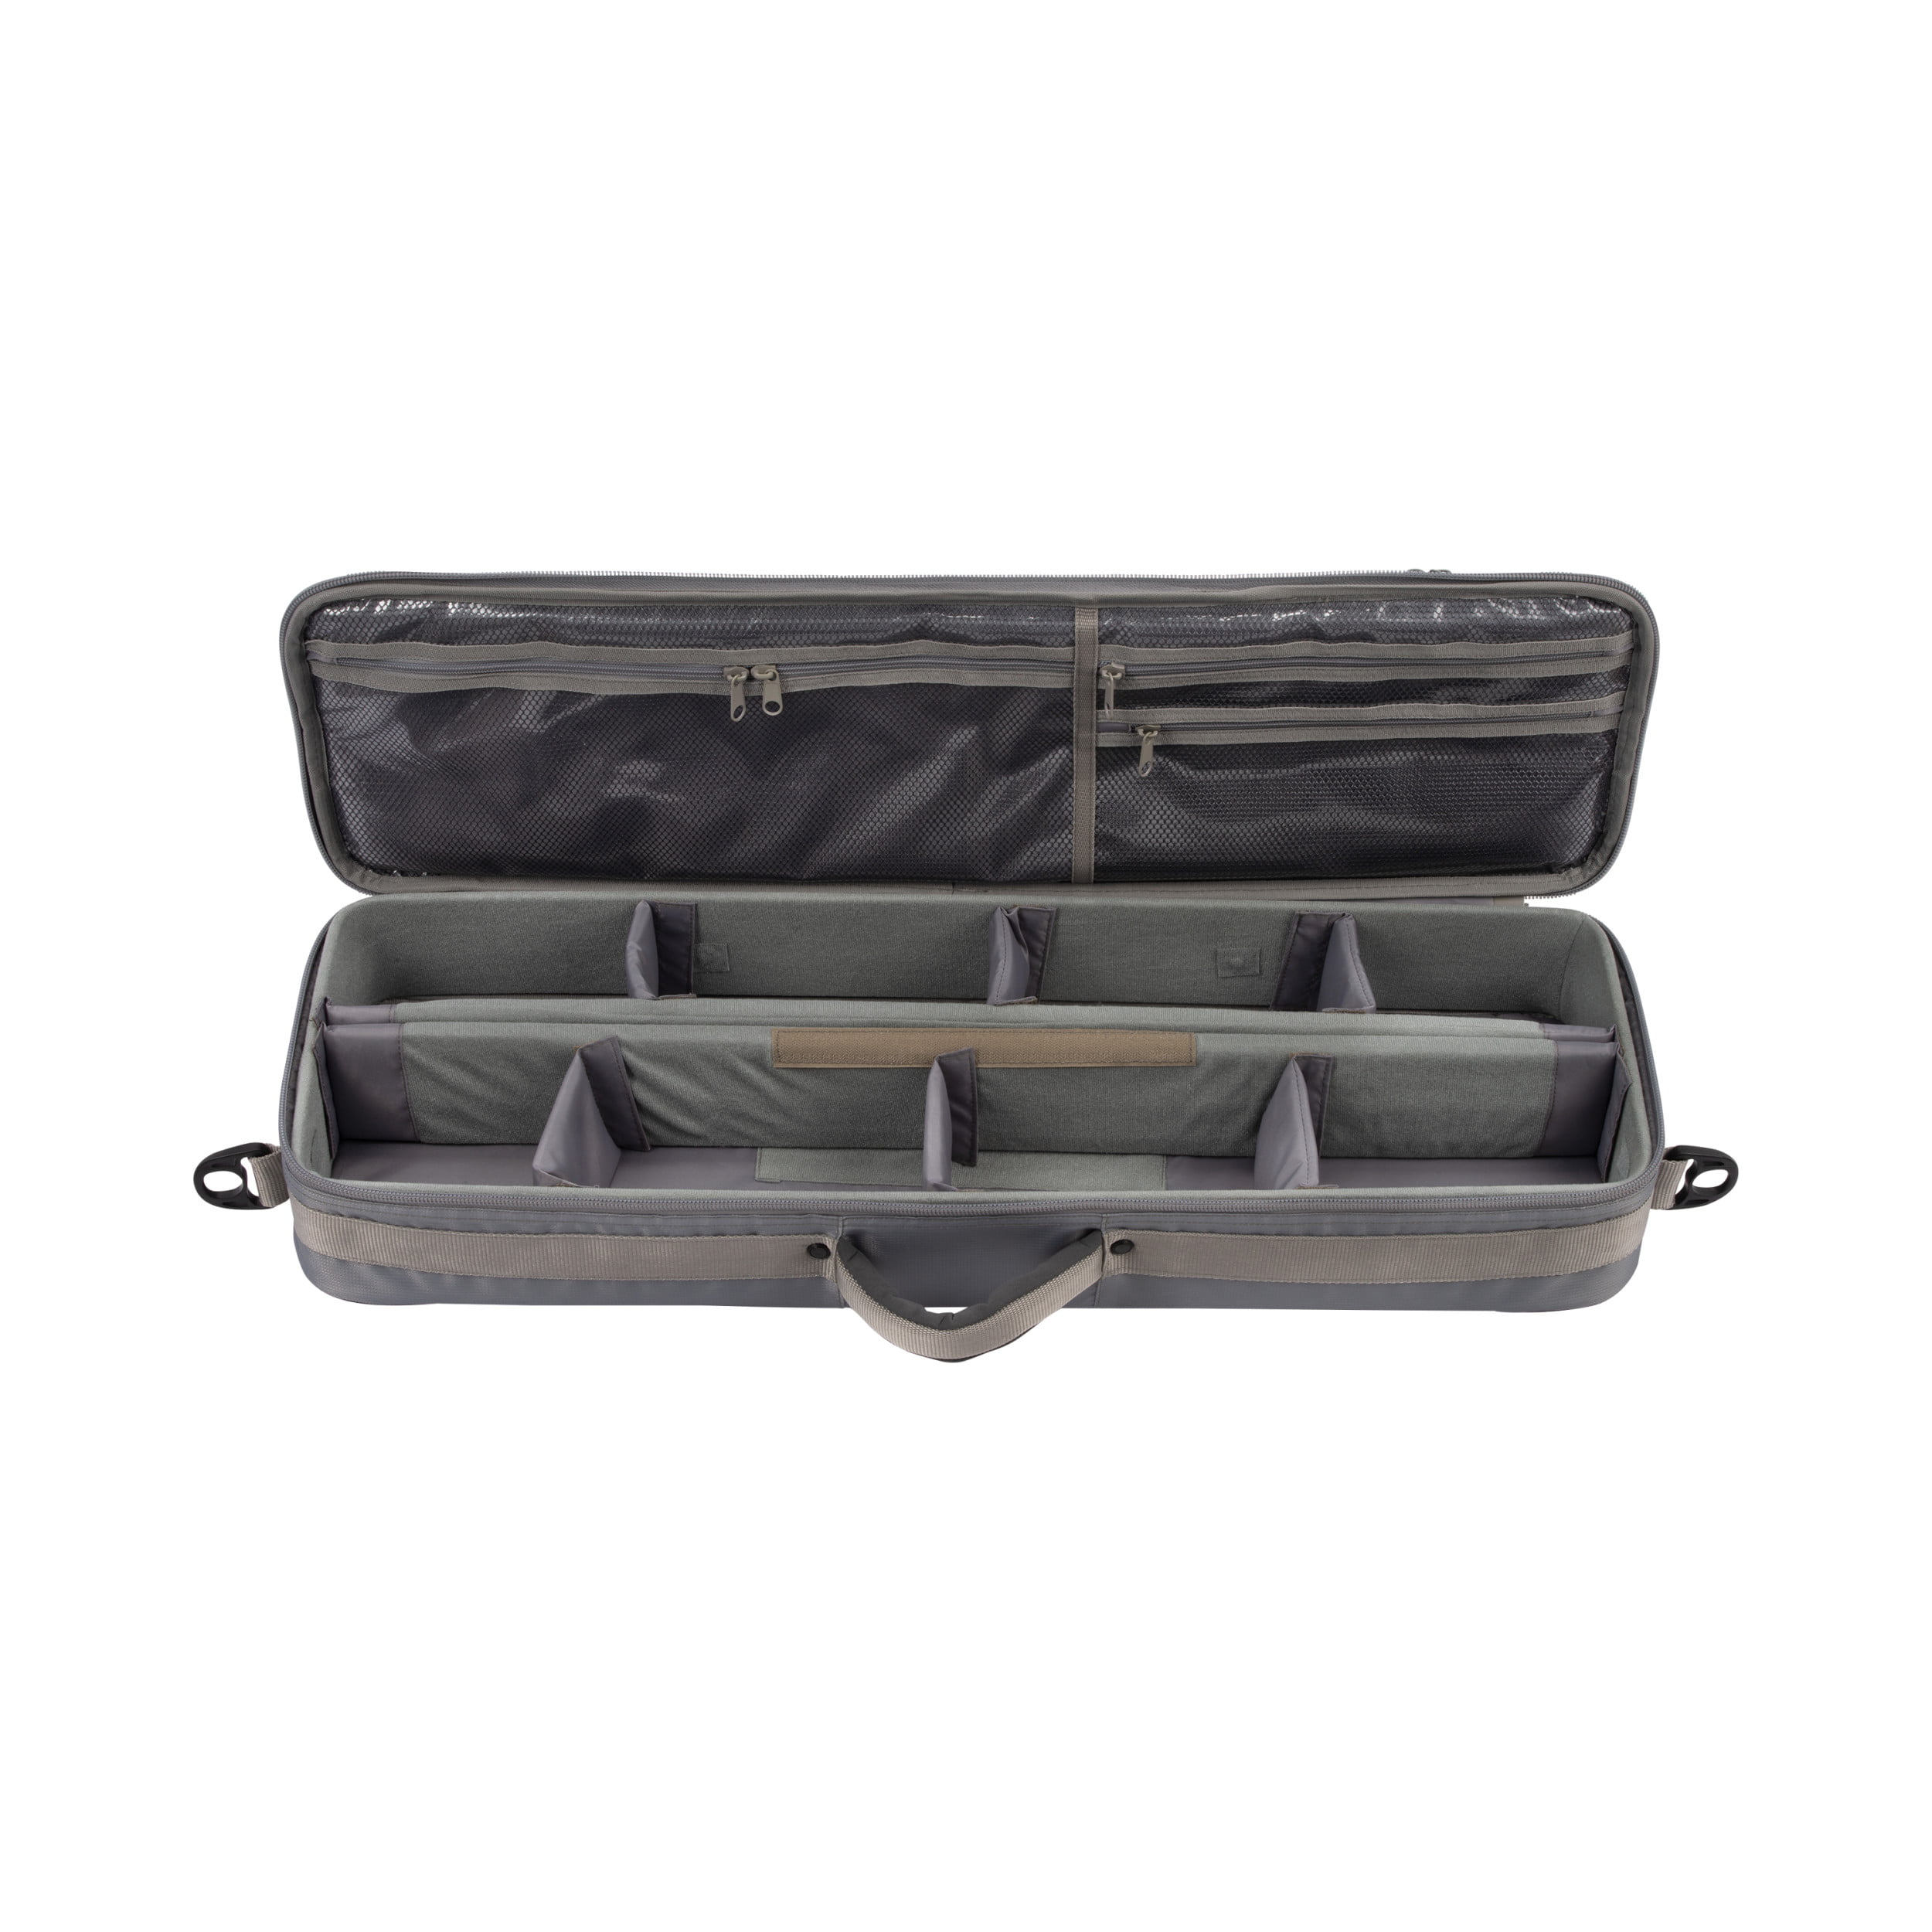 Allen Company Cottonwood Fly Fishing Rod And Gear Bag Case, Fits Up To 4  Fishing Rods, Green 